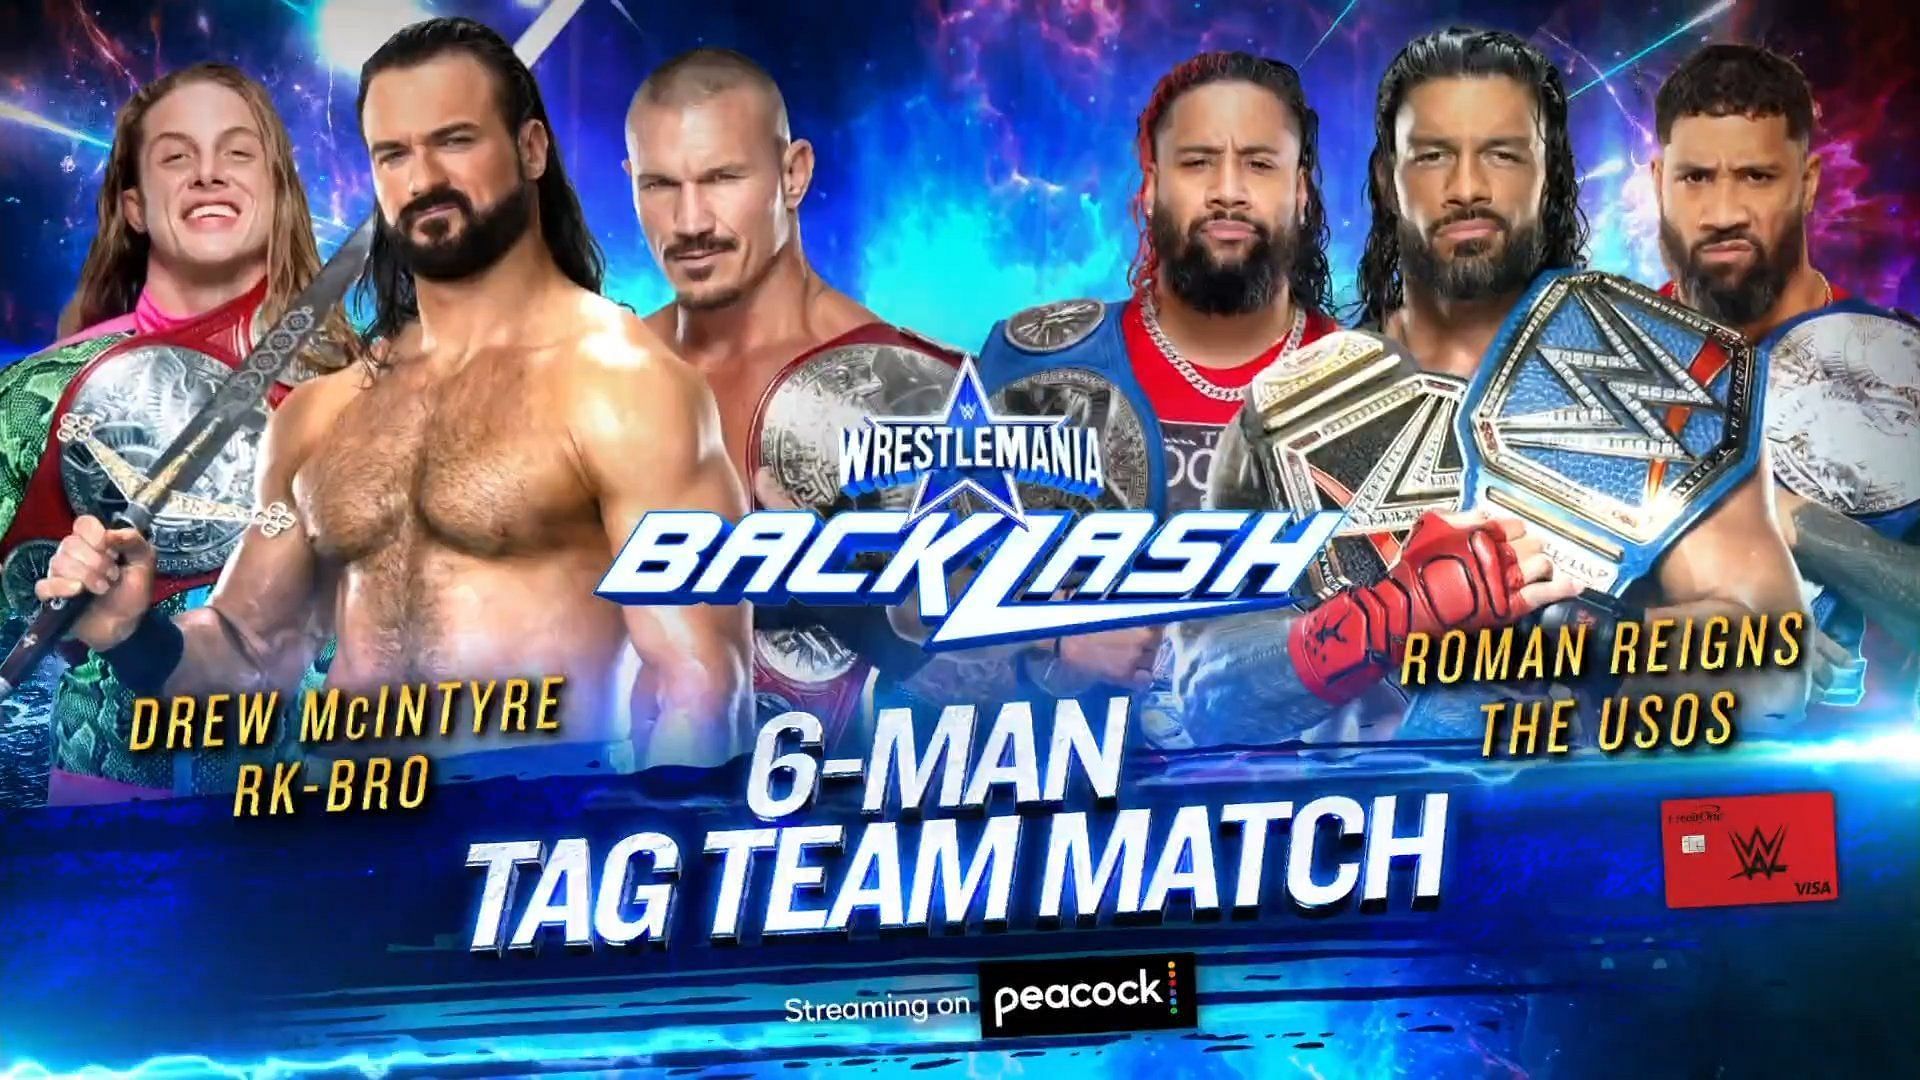 This match is rumored to headline WrestleMania Backlash.